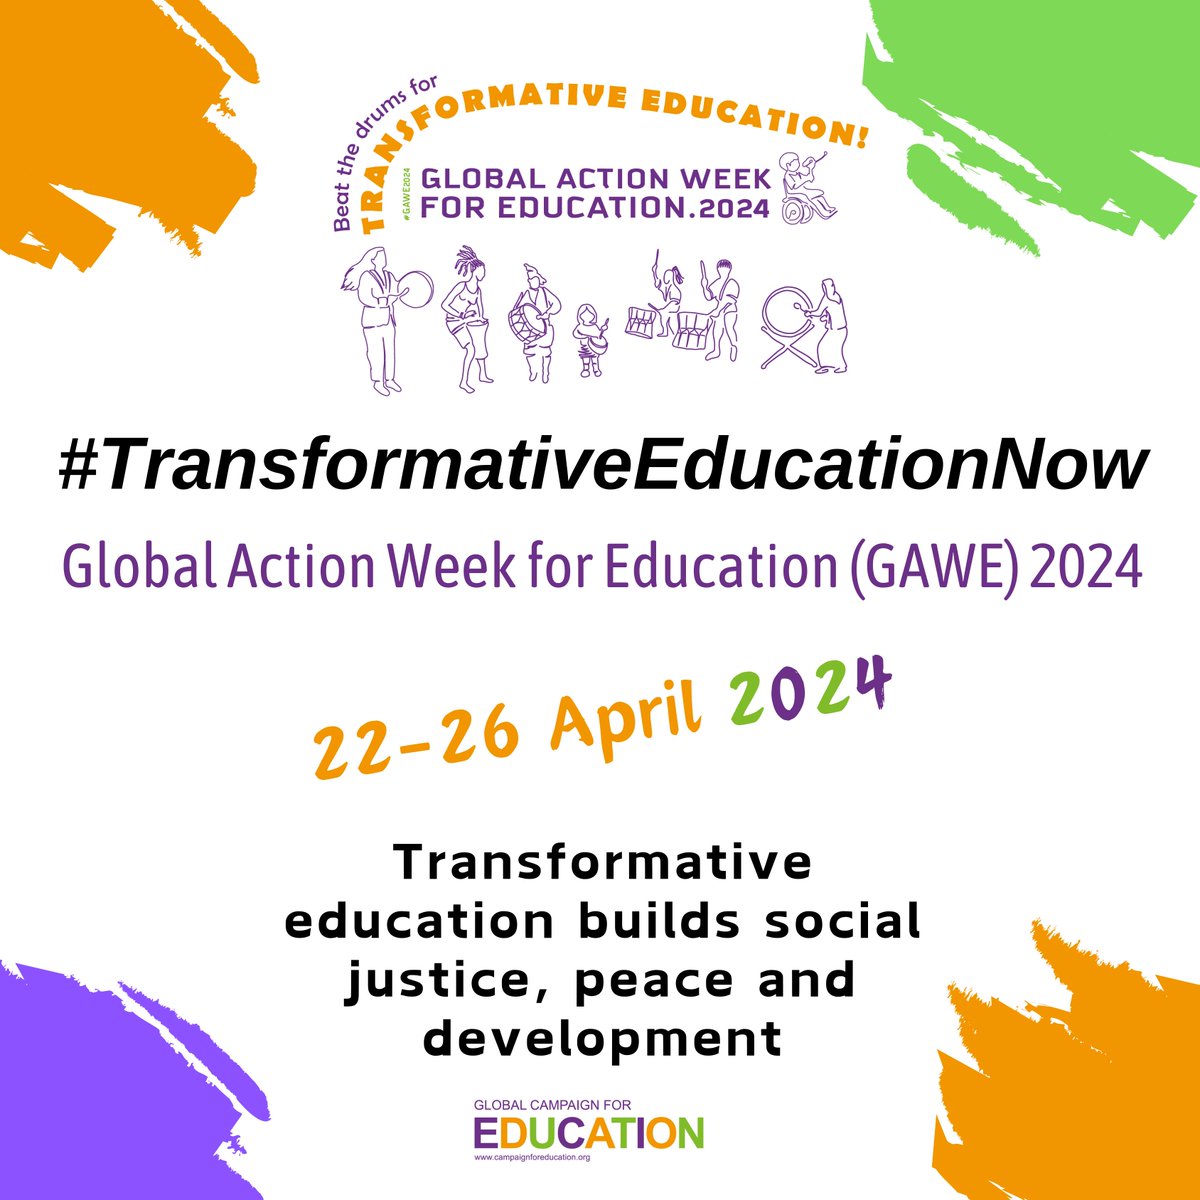 The countdown has begun! Global Action Week for Education (GAWE) 2024, 22-26 Apr is themed on Transformative Education. Use the hashtag #TransformativeEducationNow & support the campaign for education that has the power to transform lives. #EducationForAll #NoOneLeftBehind